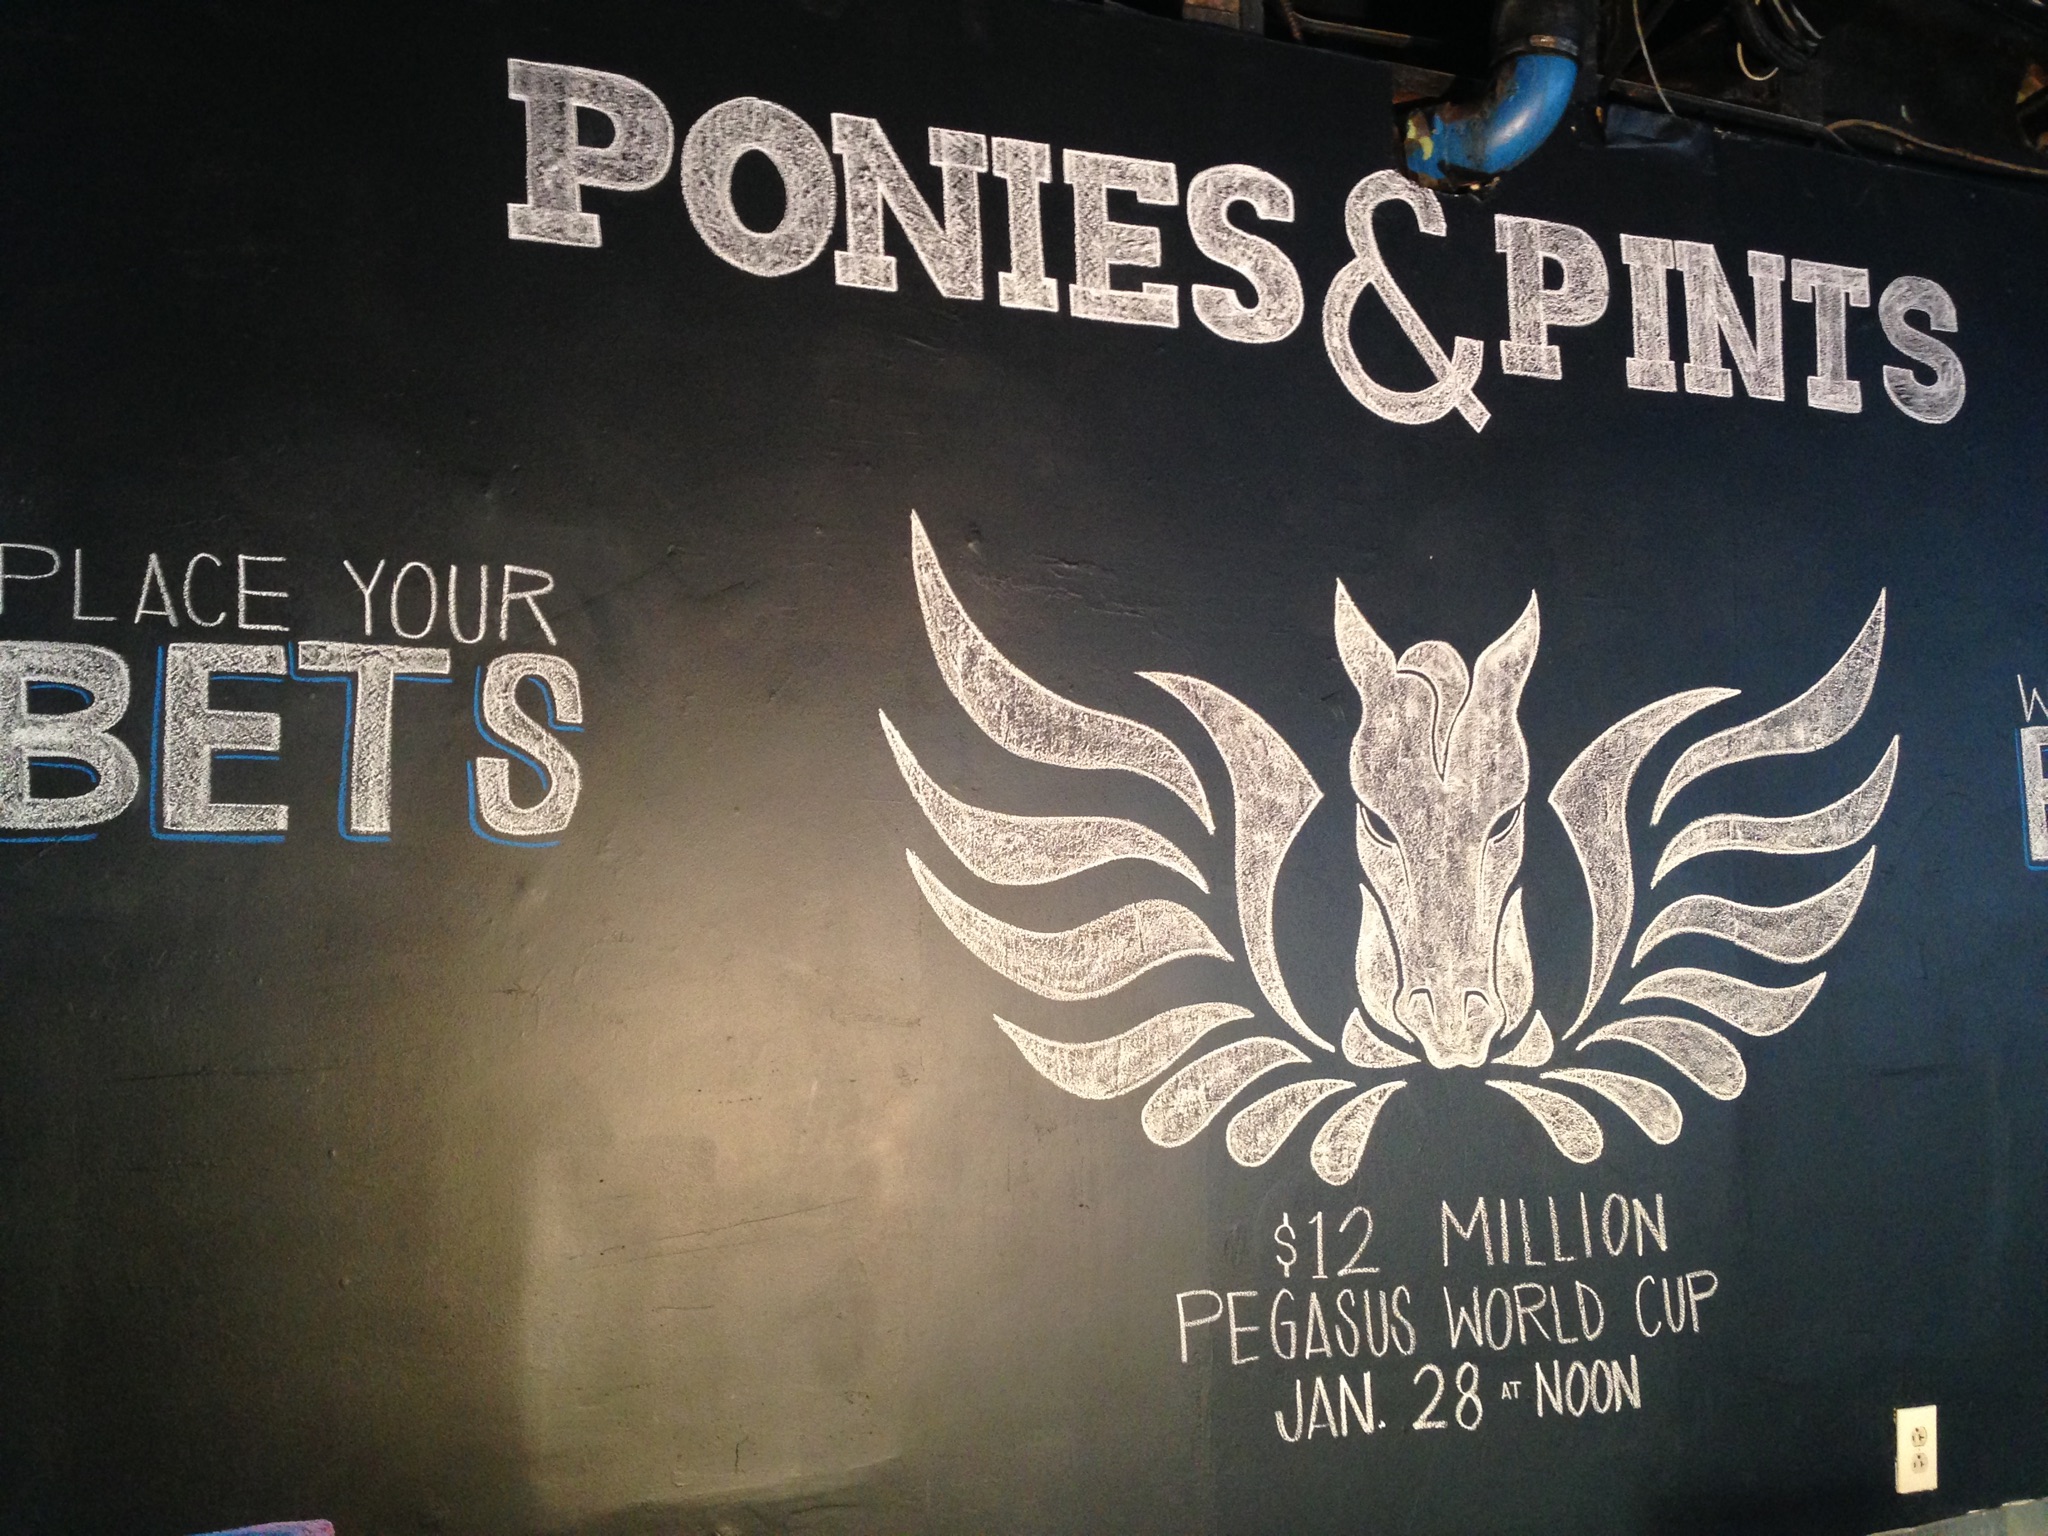 Ponies & Pints will feature full service dining and have 60 beers on tap. 